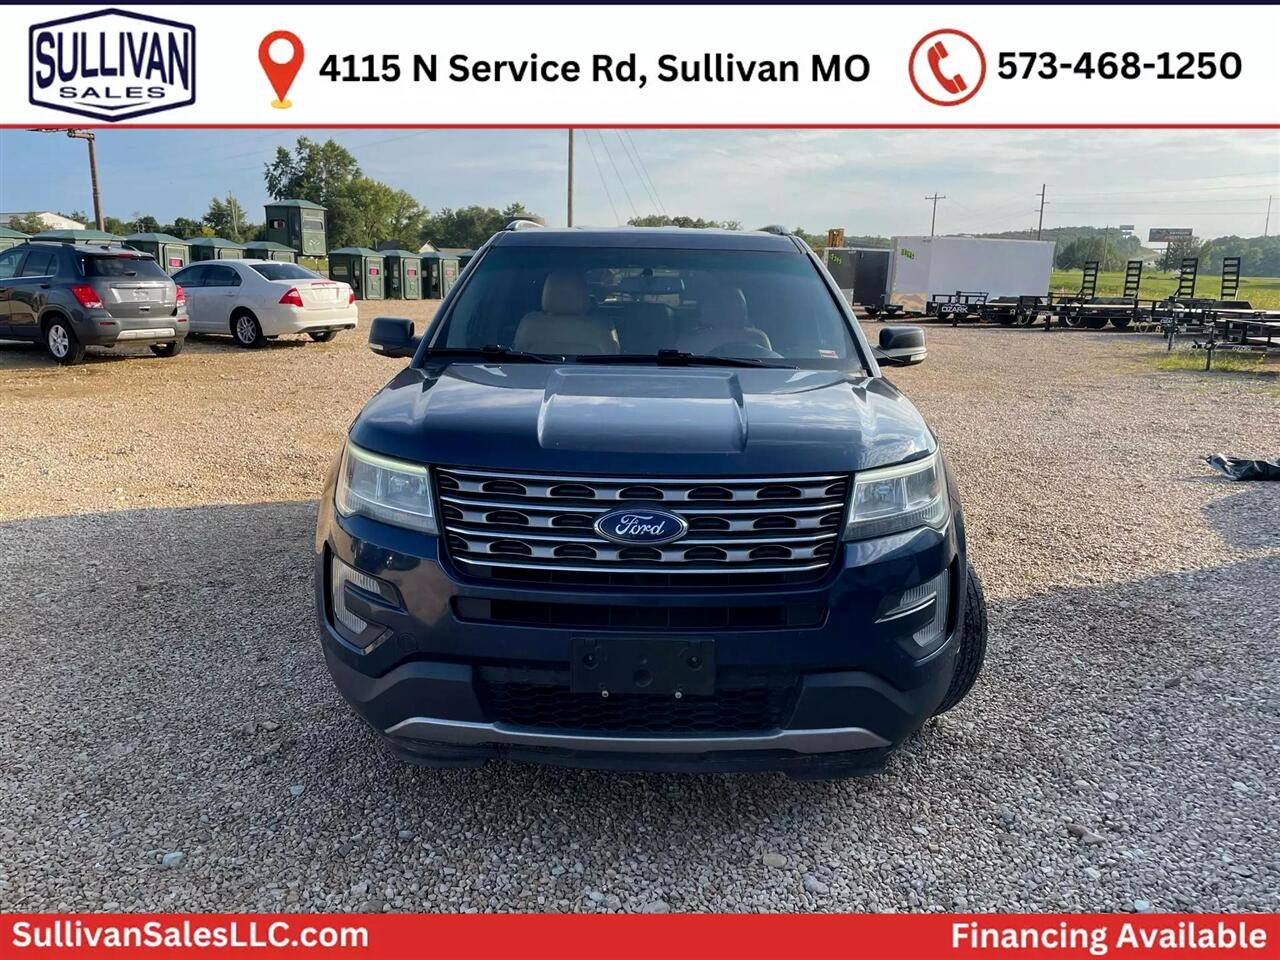 Used 2016 Ford Explorer XLT with VIN 1FM5K8D84GGB17849 for sale in Sullivan, MO